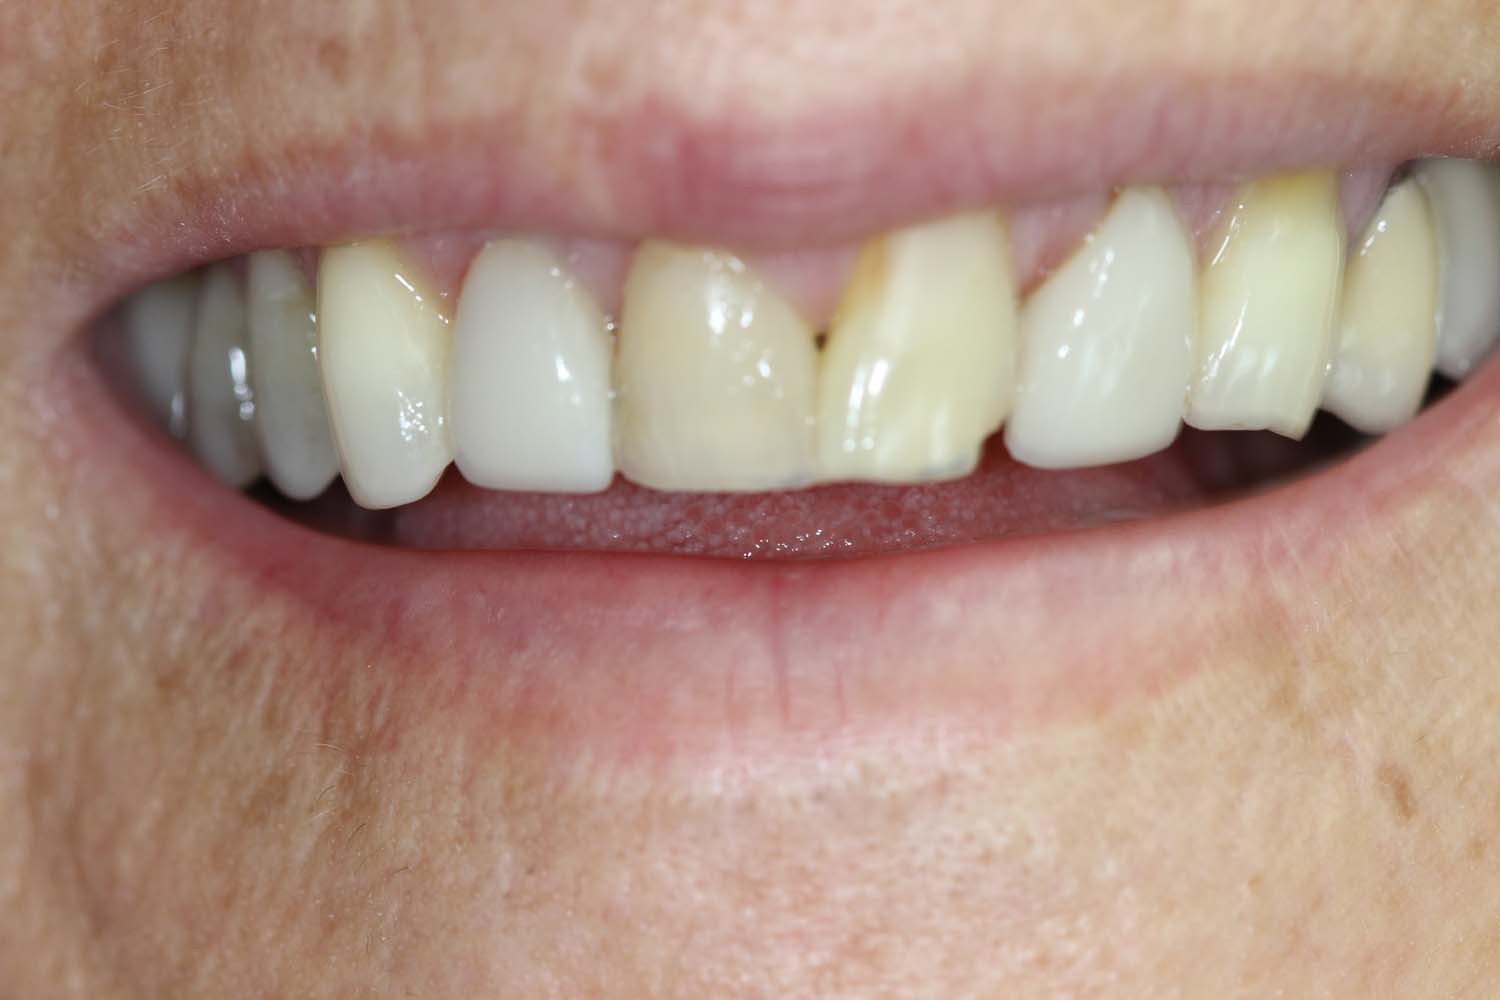 Before photo displaying dental issues prior to treatment at Princeton Prosthodontics.